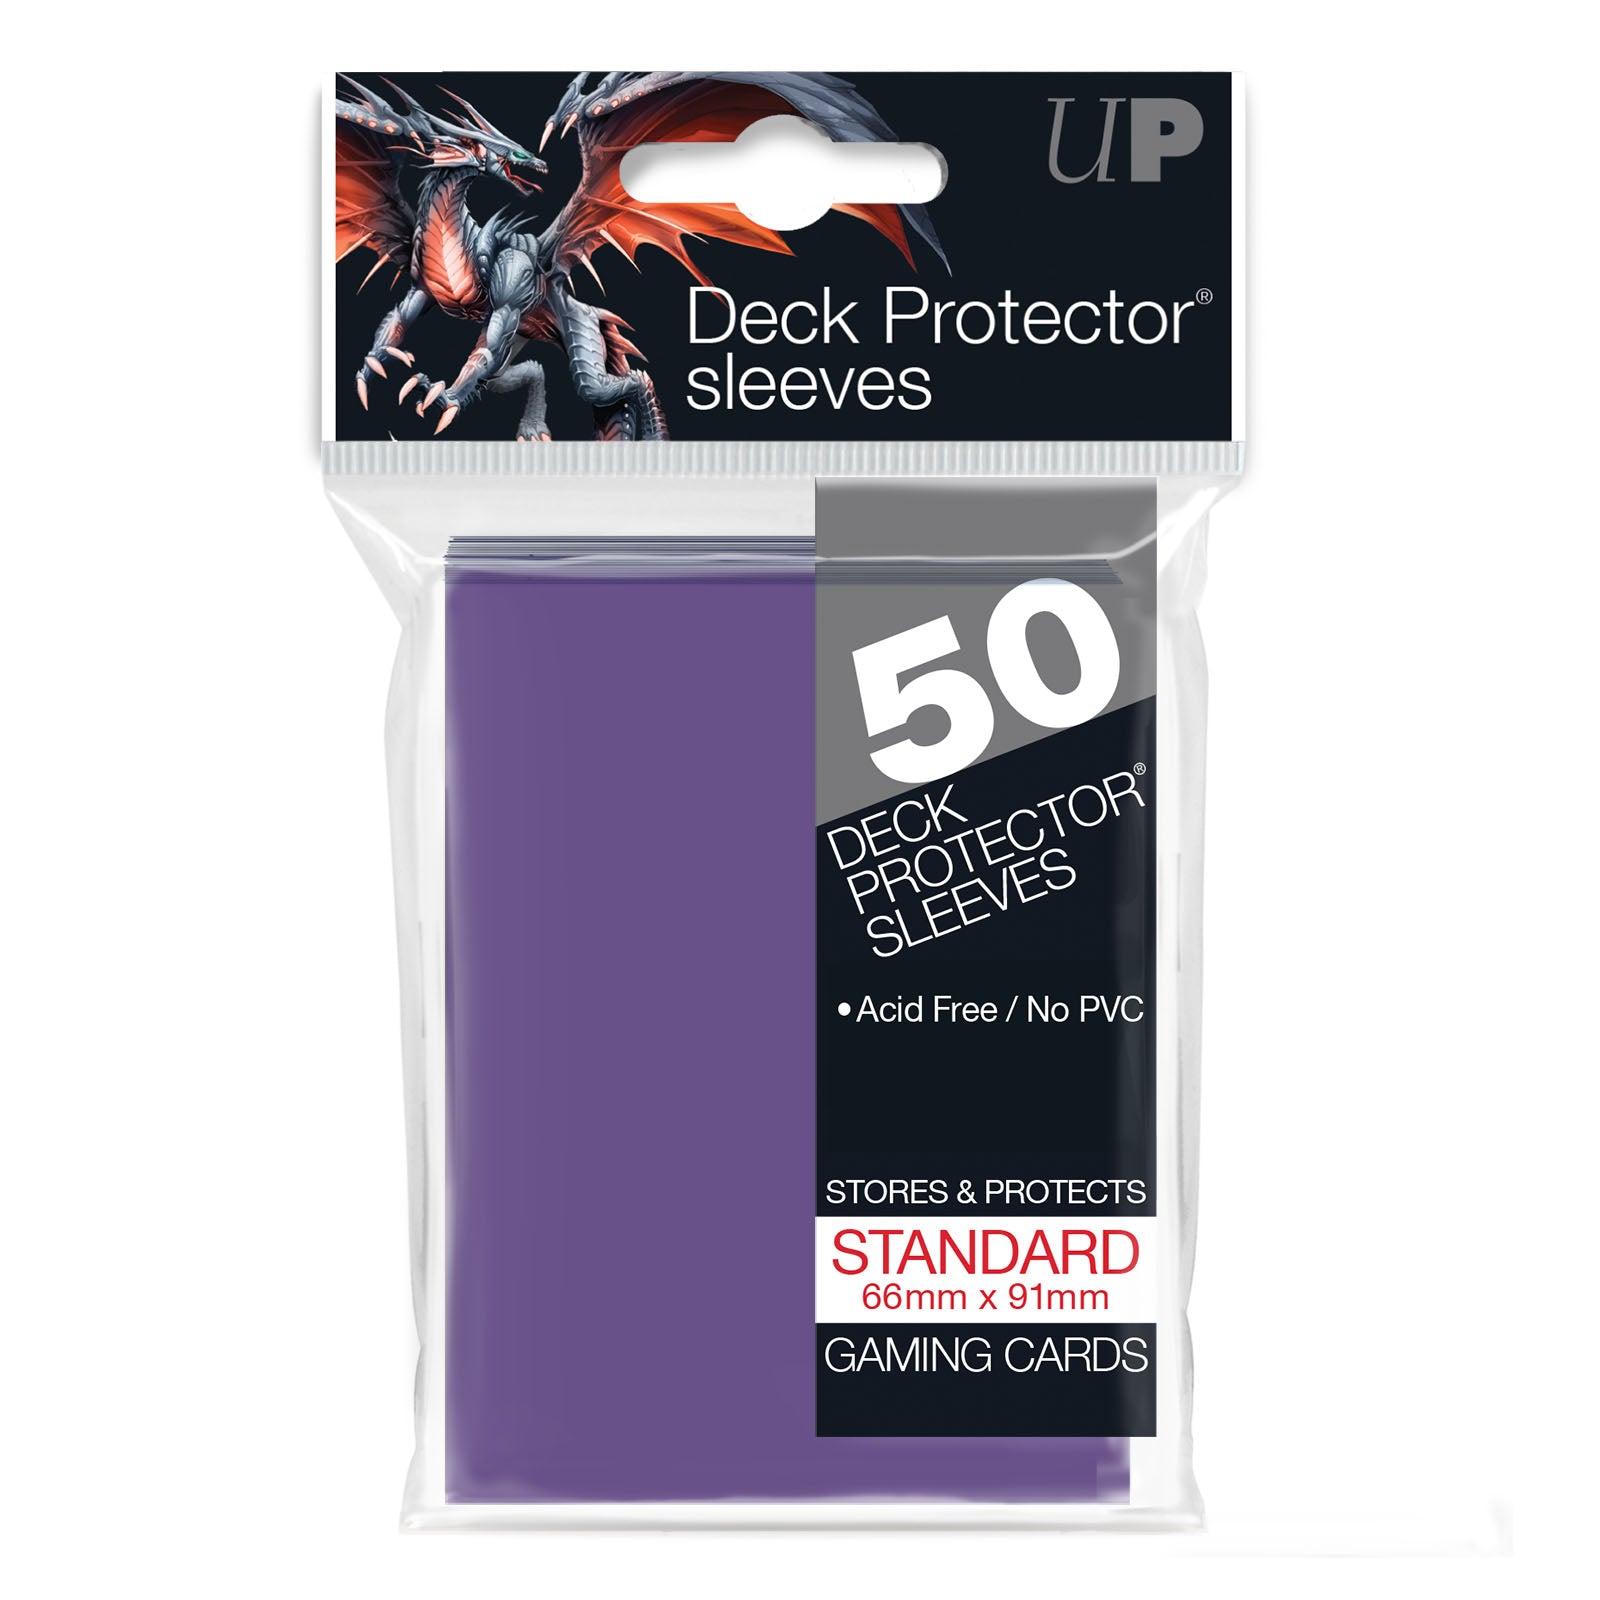 Ultra PRO PRO-Matte 60CT Small Size Deck Protector Sleeves - White 